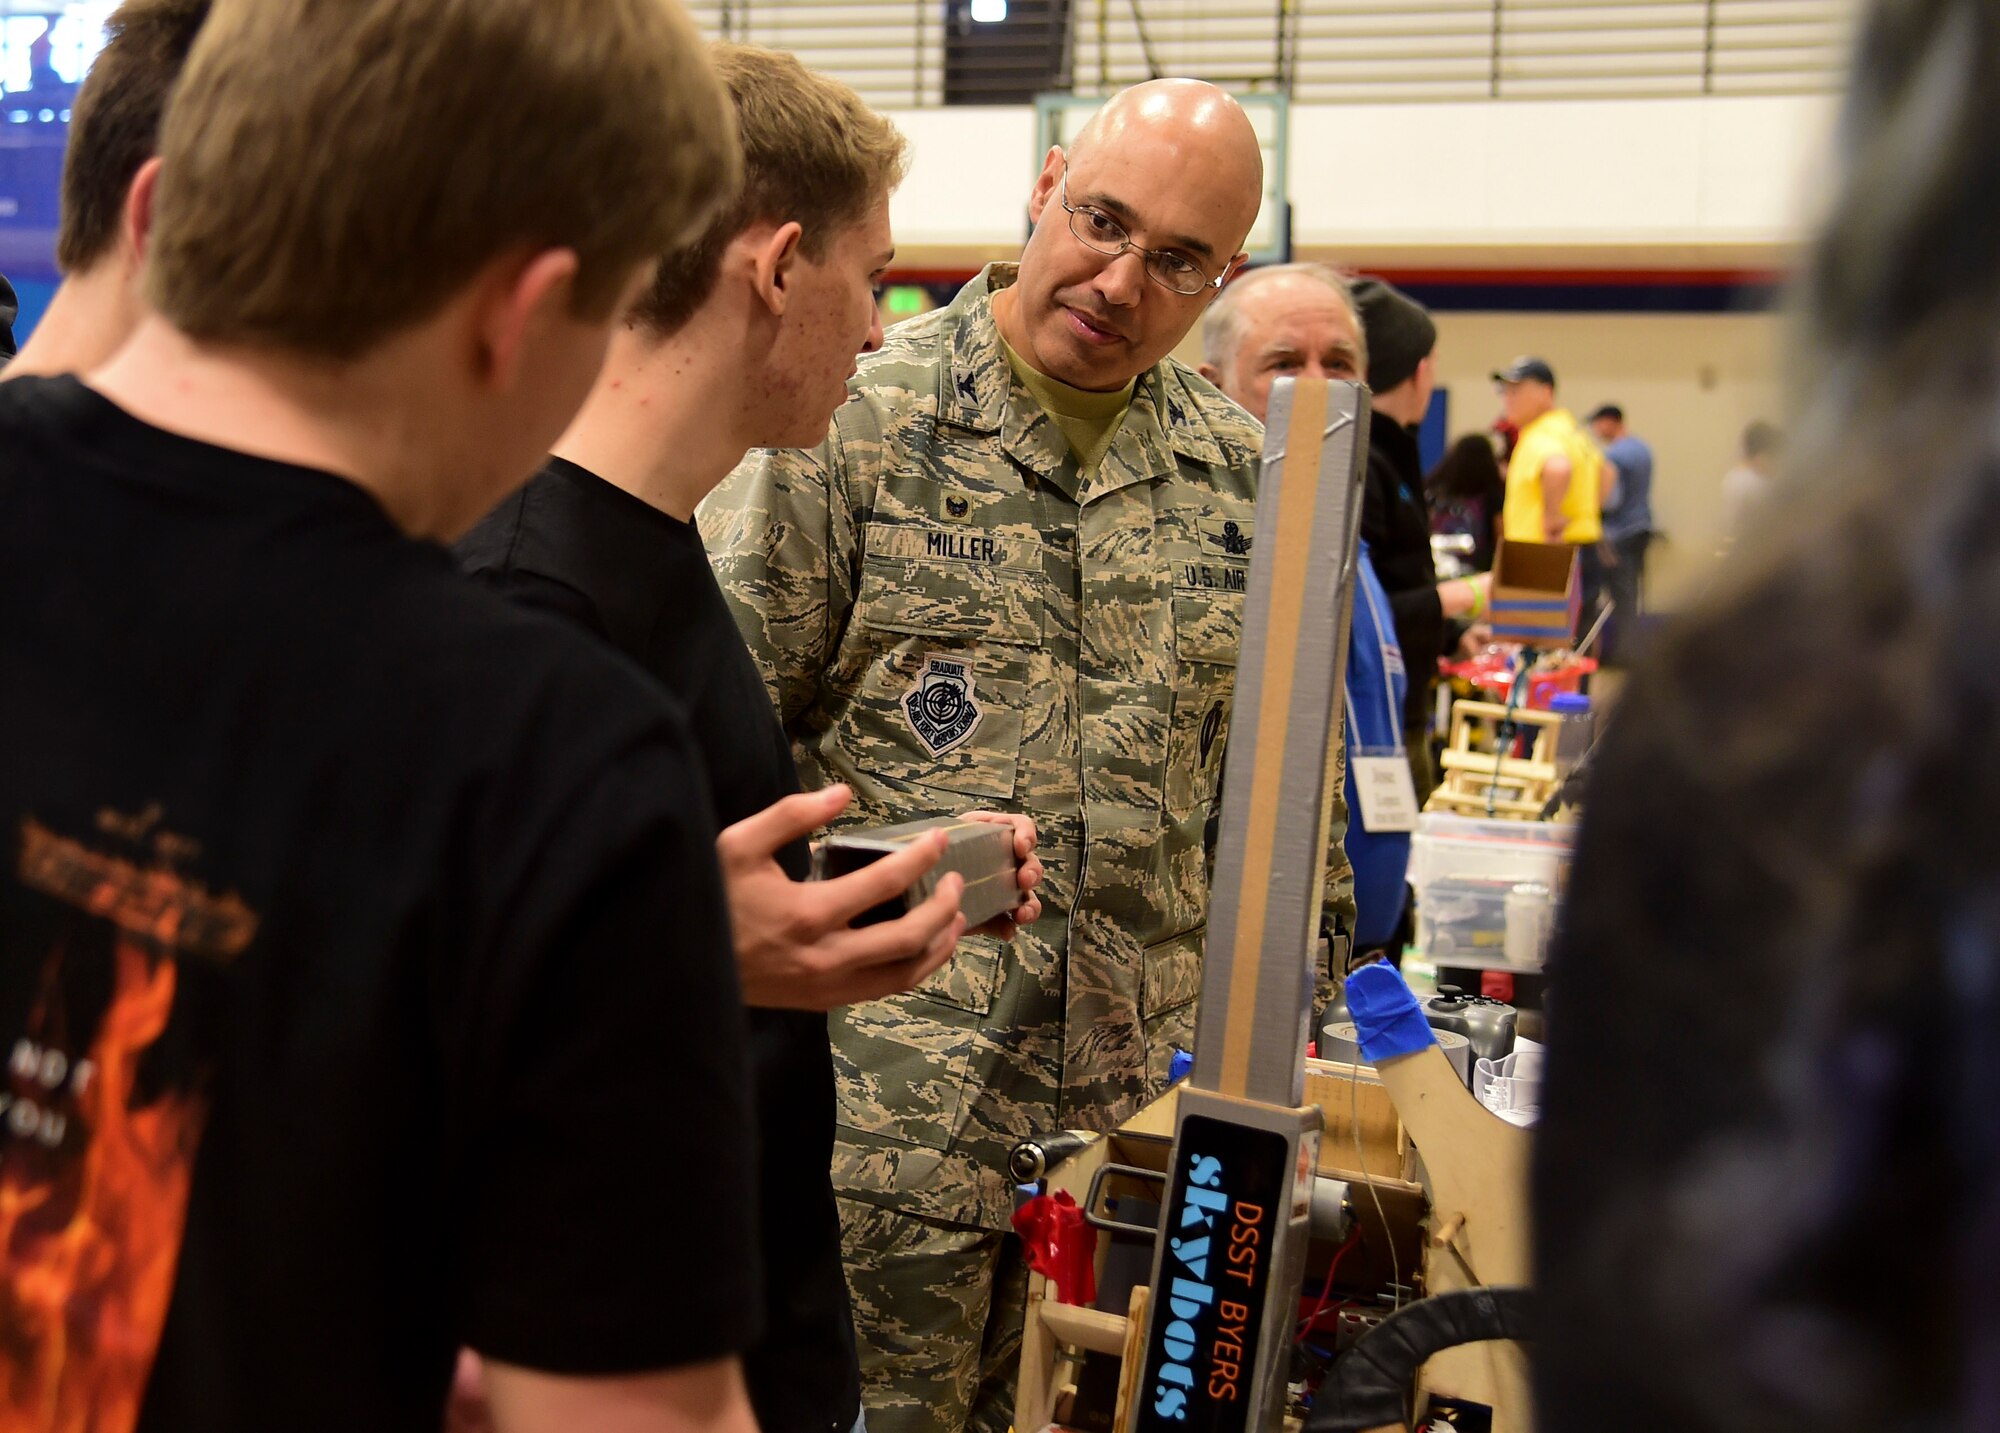 Twenty-six high school teams and one middle school team, from the state of Colorado, were each given six weeks to build a robot from the same provided materials. (U.S. Air Force photo by Airman 1st Class Holden S. Faul/ Released)